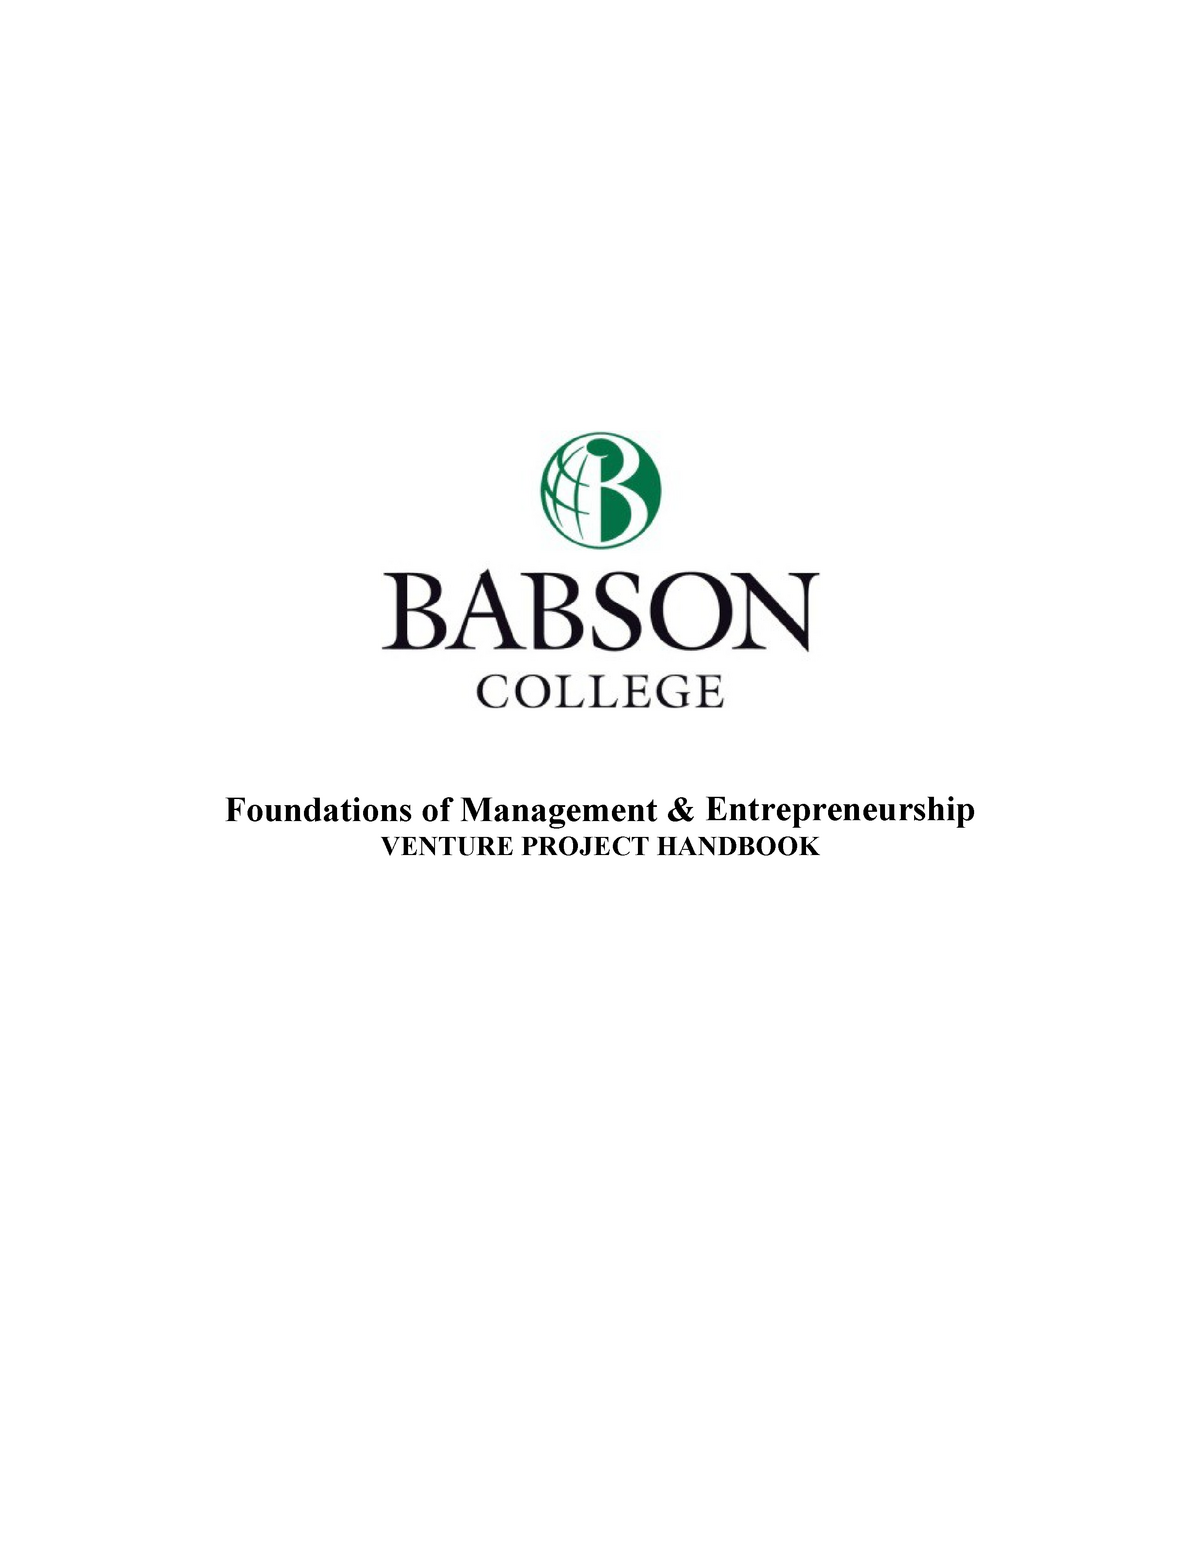 babson fme